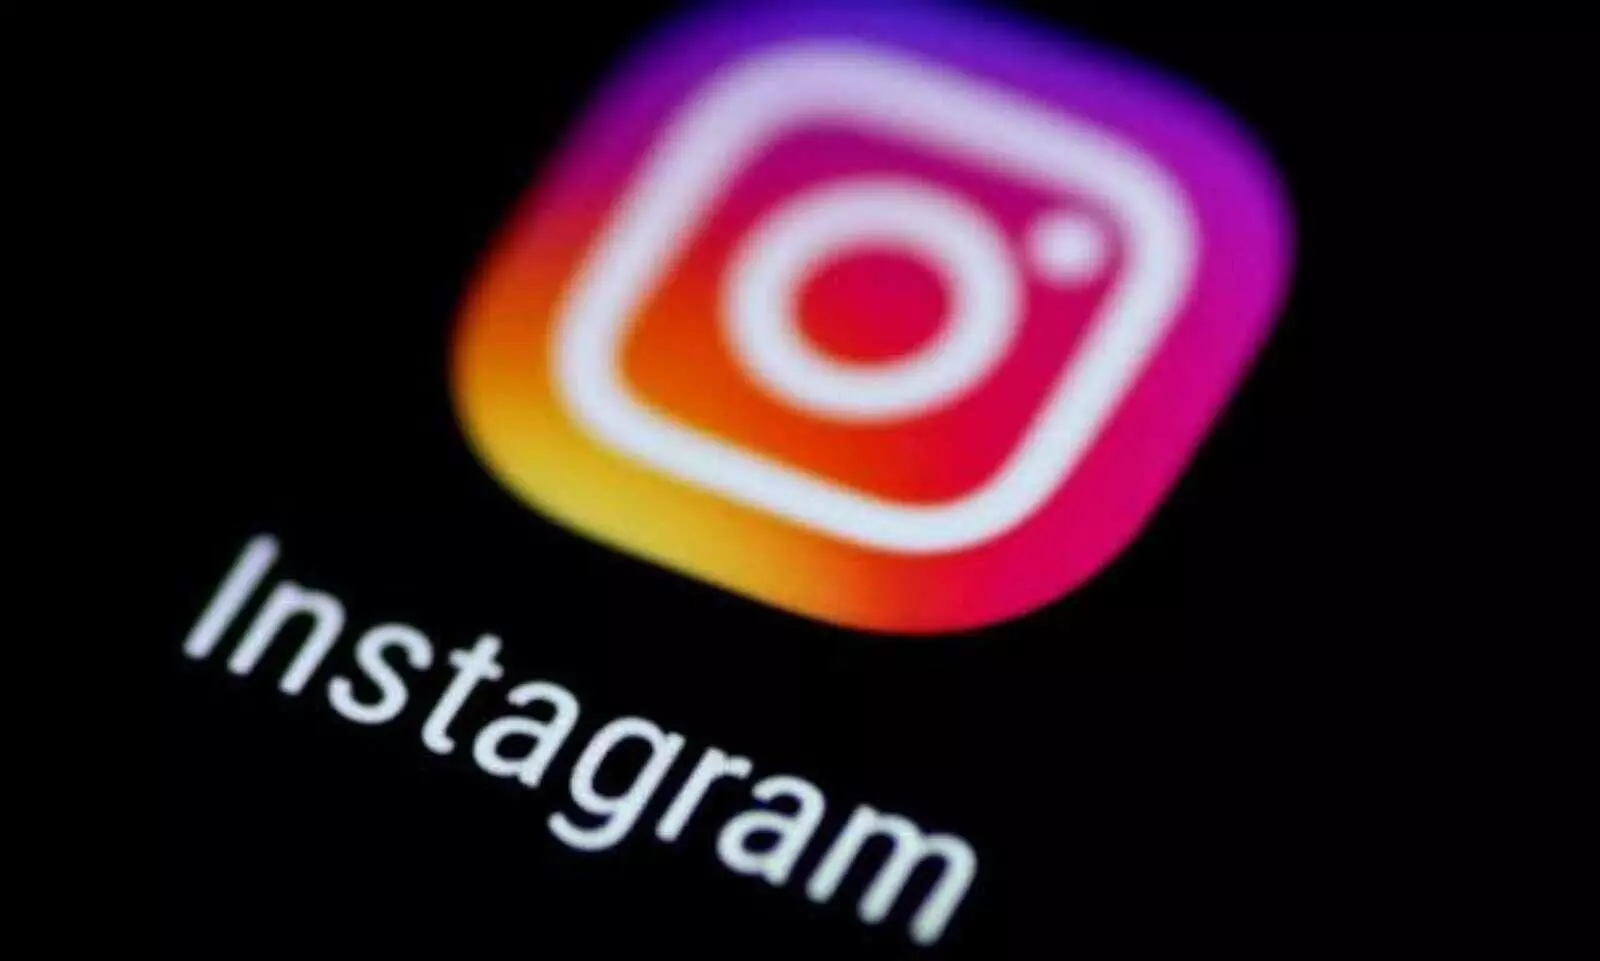 Instagram sorry for users story disappearance by technical glitch